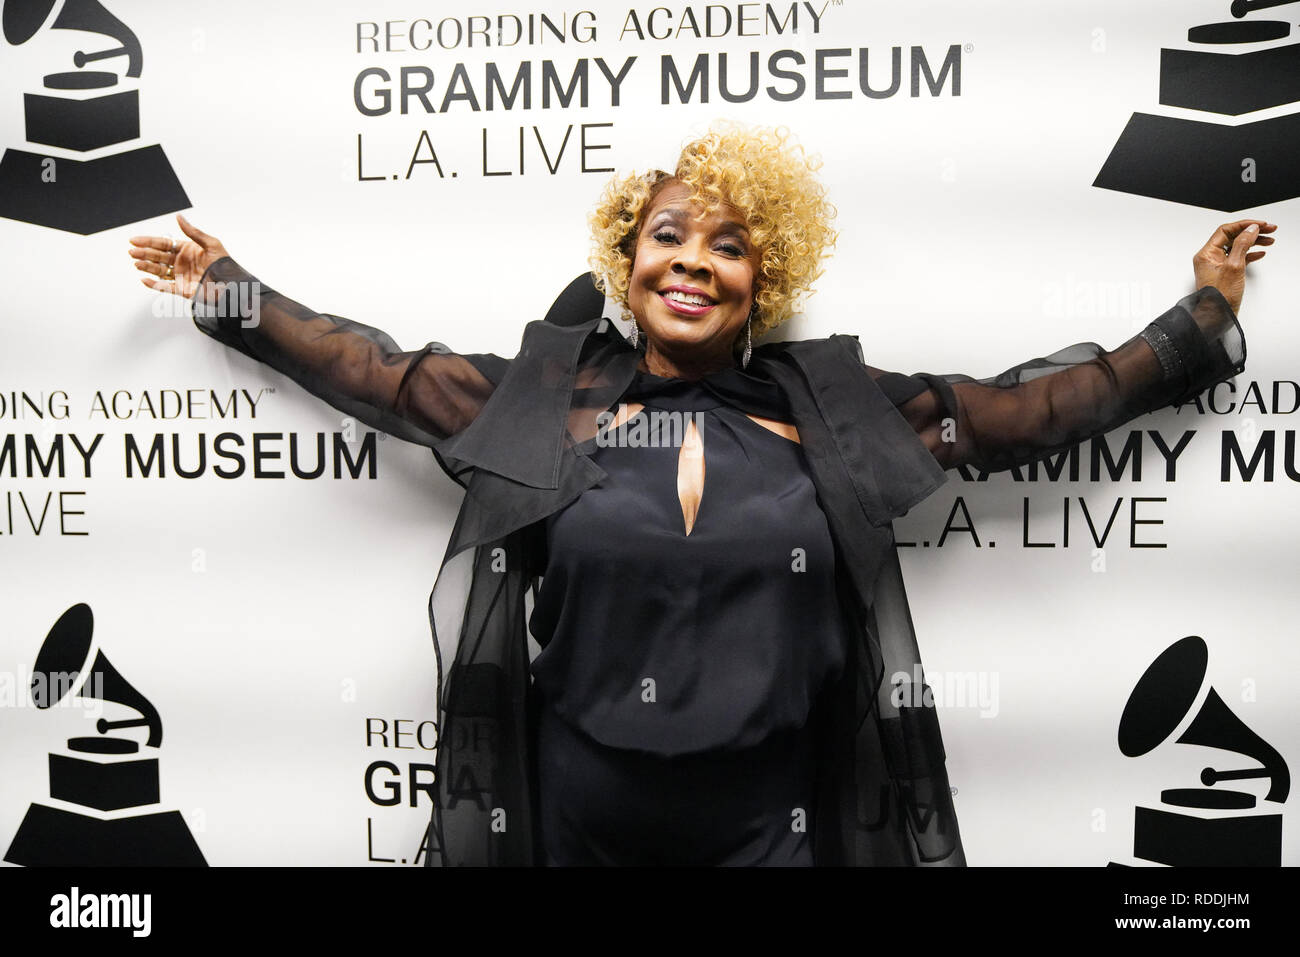 Los Angeles, CA, USA. 13th Jan, 2017. Musician Actor - THELMA HOUSTON, honored at The Grammy Museum, Los Angeles, CA, USA, January 17, 2019. Ms. Houston is an American singer and actress. She scored a number-one hit in 1977 with her recording of ''Don't Leave Me This Way'', which won the Grammy for Best Female R&B Vocal Performance. 25 years ago to the day, Ms. Houston lost her Grammy Award in the devastating Northridge earthquake. Scott Goldman, artistic director for the Grammy Muesum, presented Ms. Houston with a replacement grammy award. Ms. Houston performed some of her biggest hi Stock Photo